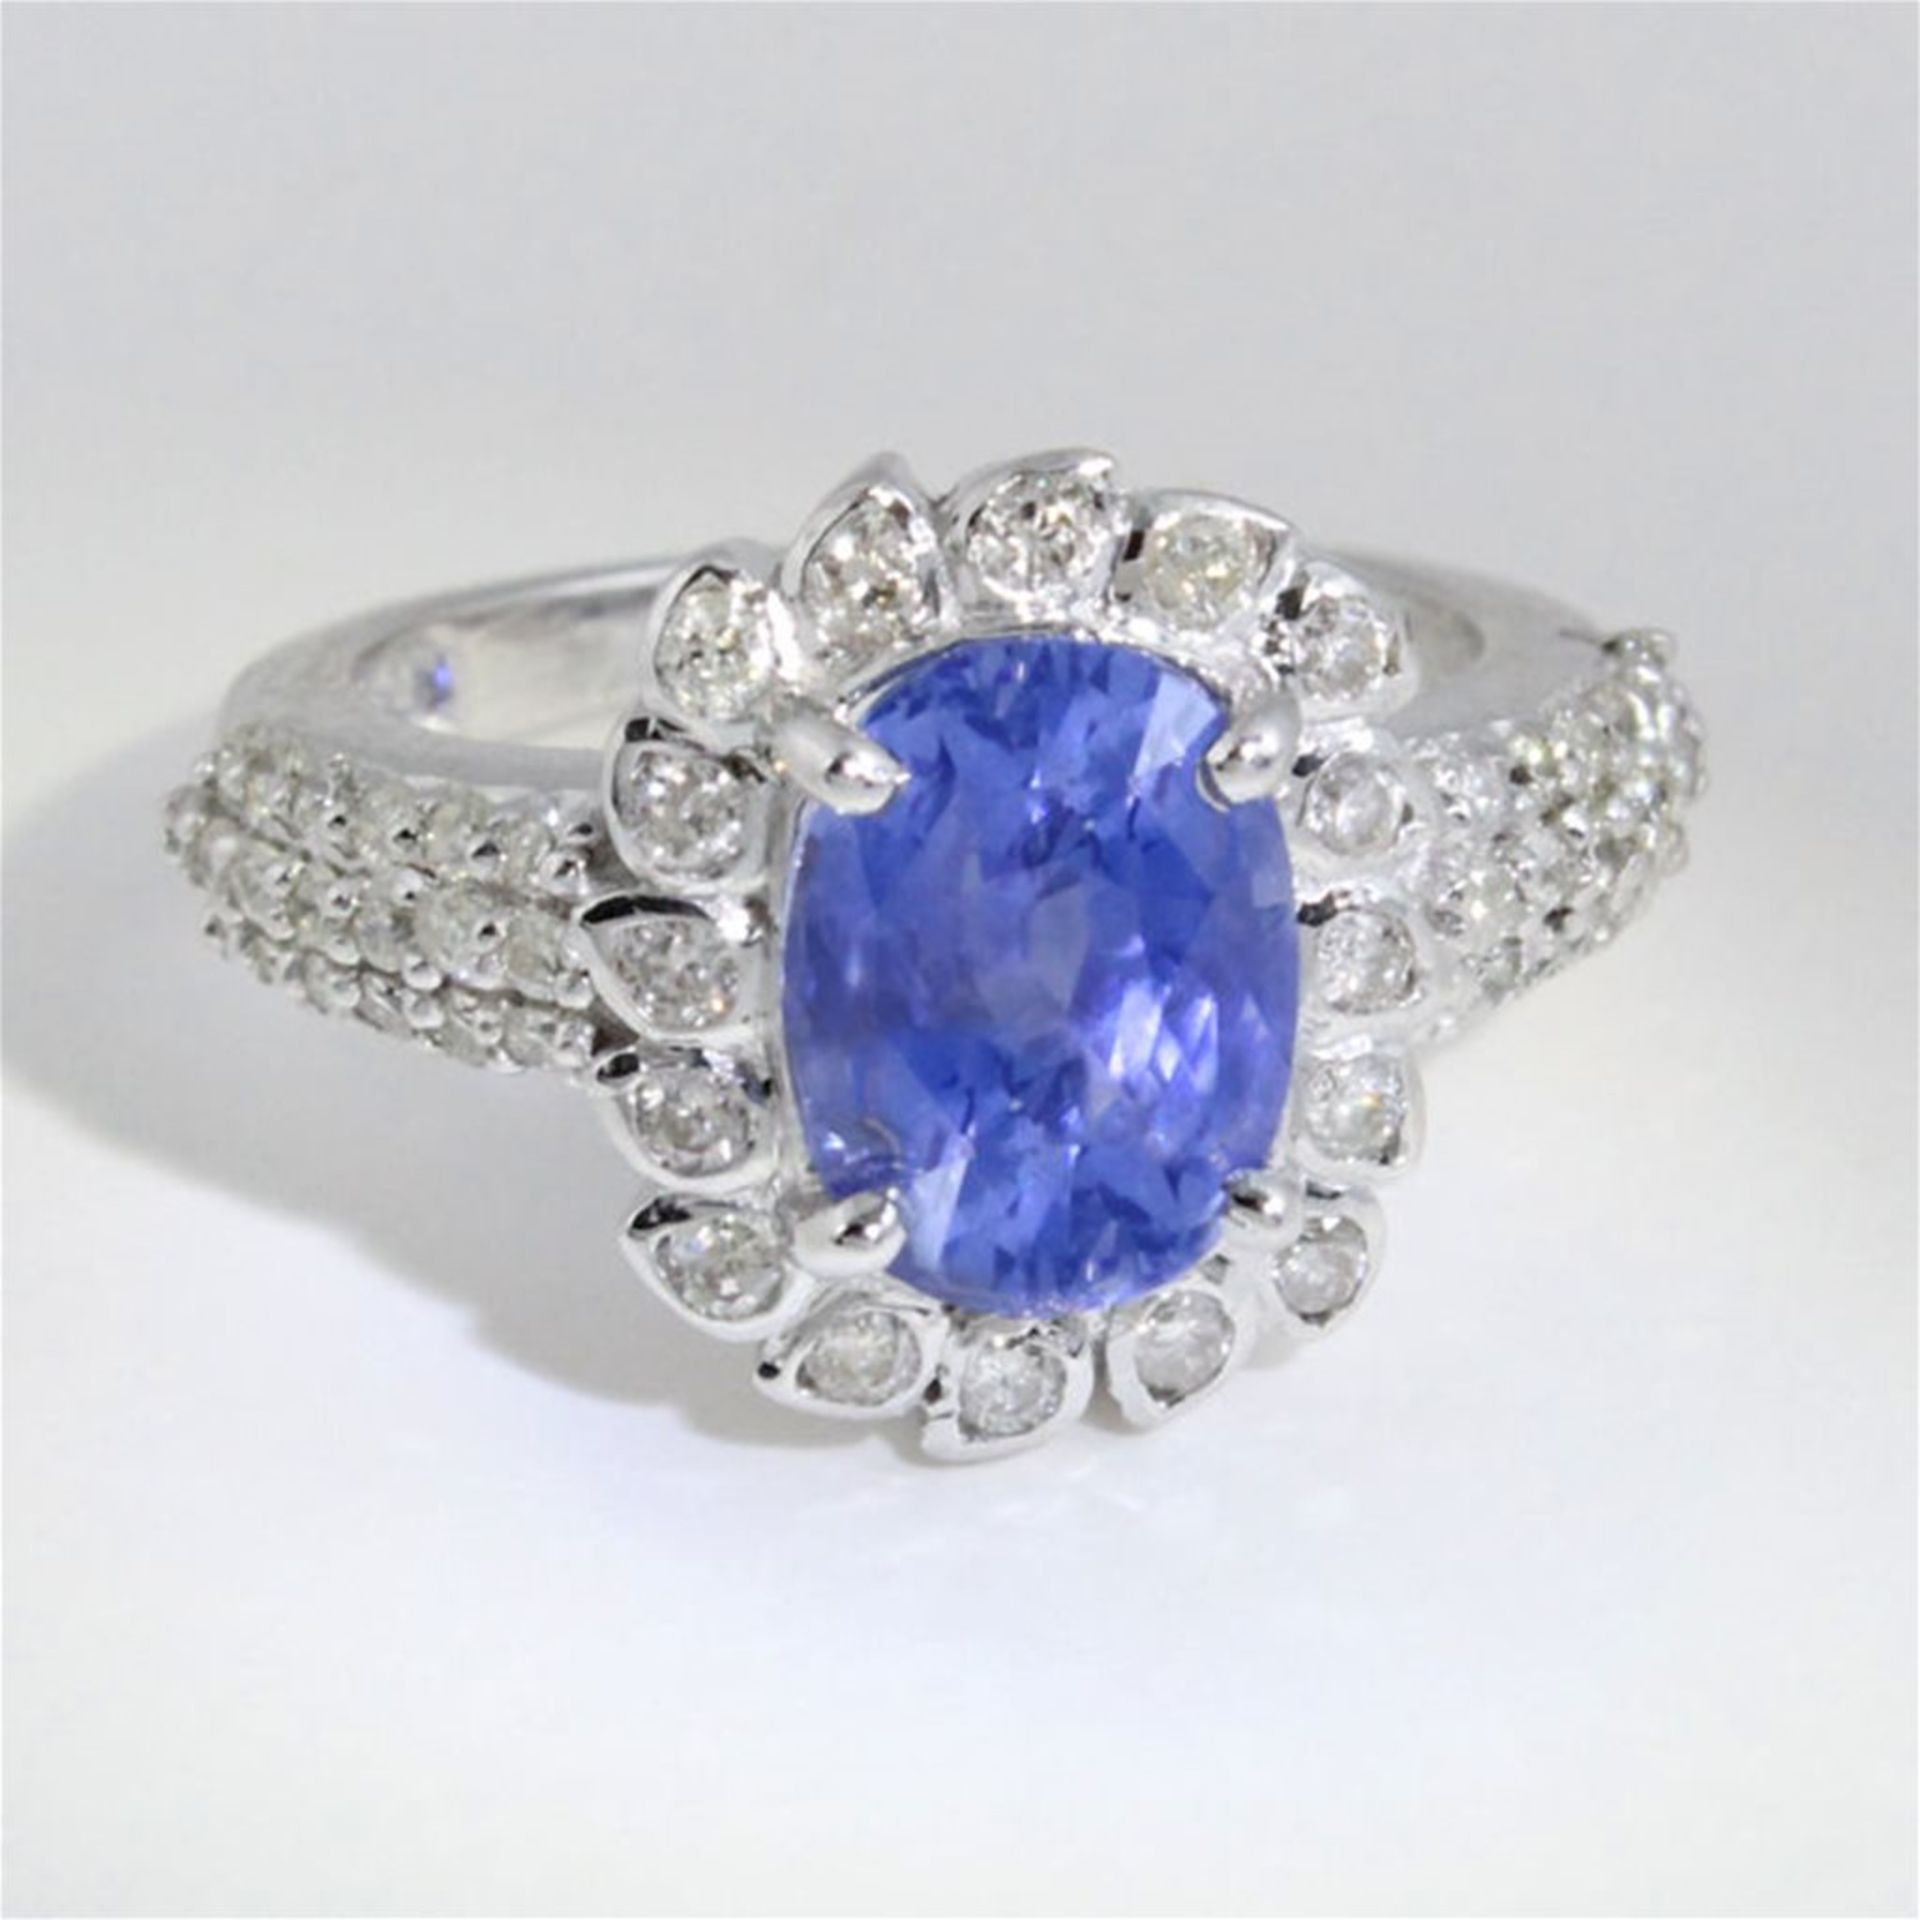 IGI Certified 14 K Very Exclusive Designer White Gold Blue Sapphire and Diamond Ring